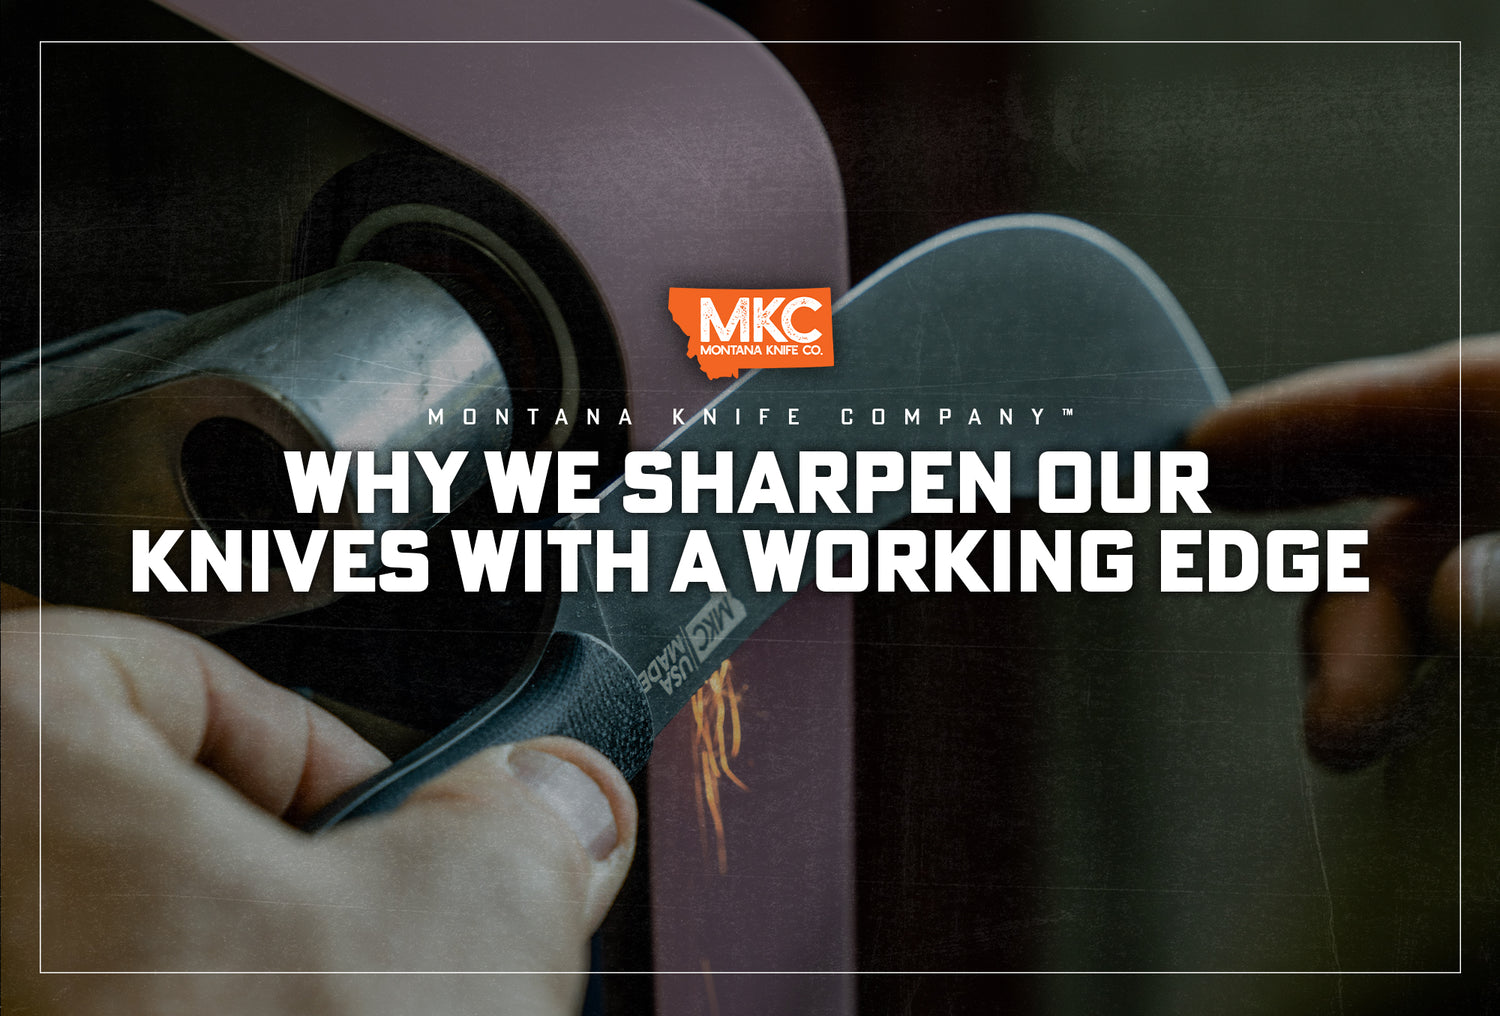 The Ultimate Guide to Picking the Right Sharpening Angle for Your